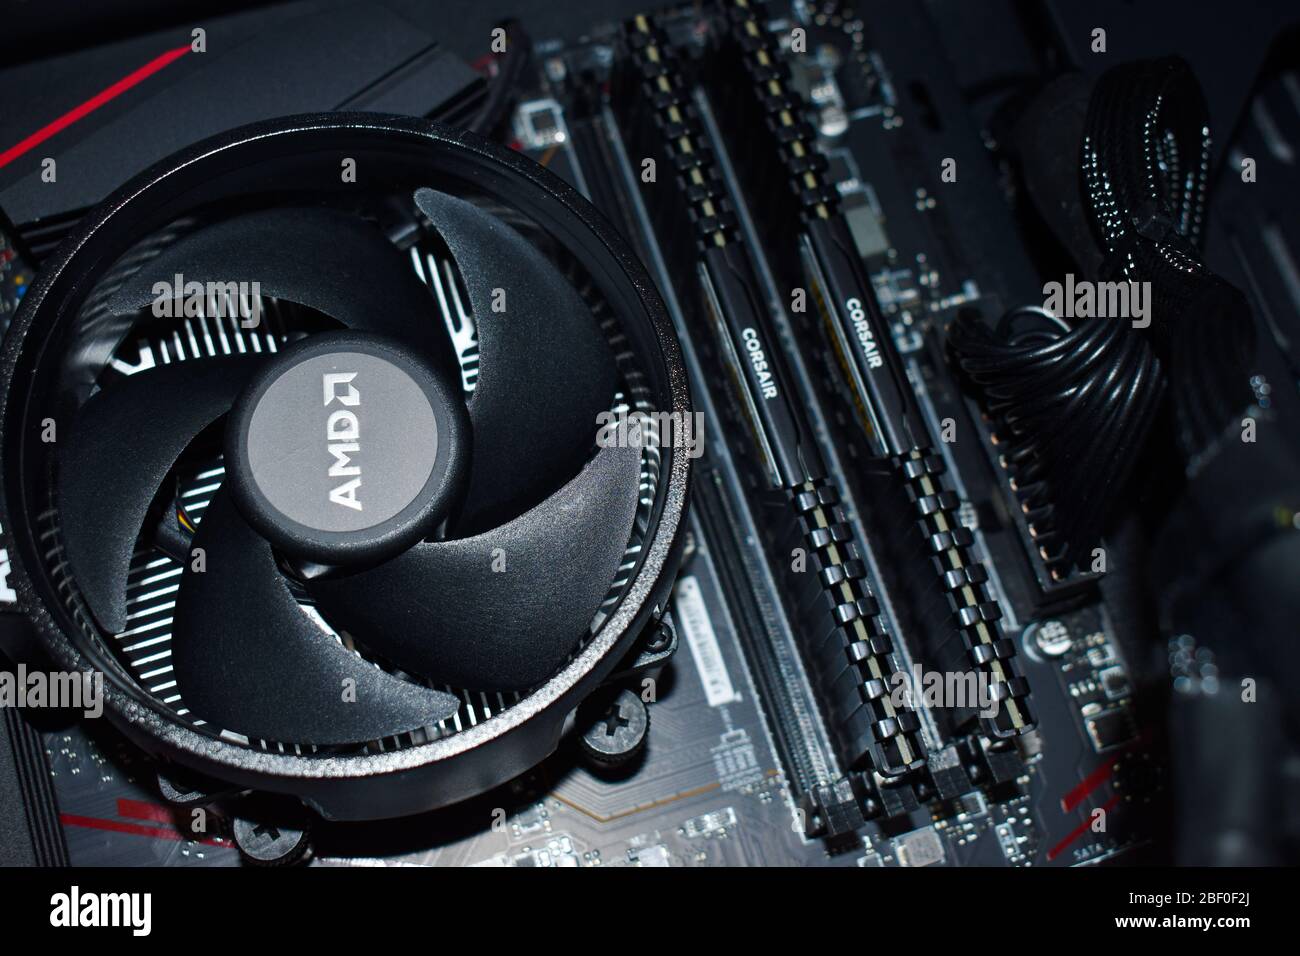 AMD Ryzen 3600 processor and Corsair RAM in a gaming PC Stock Photo - Alamy